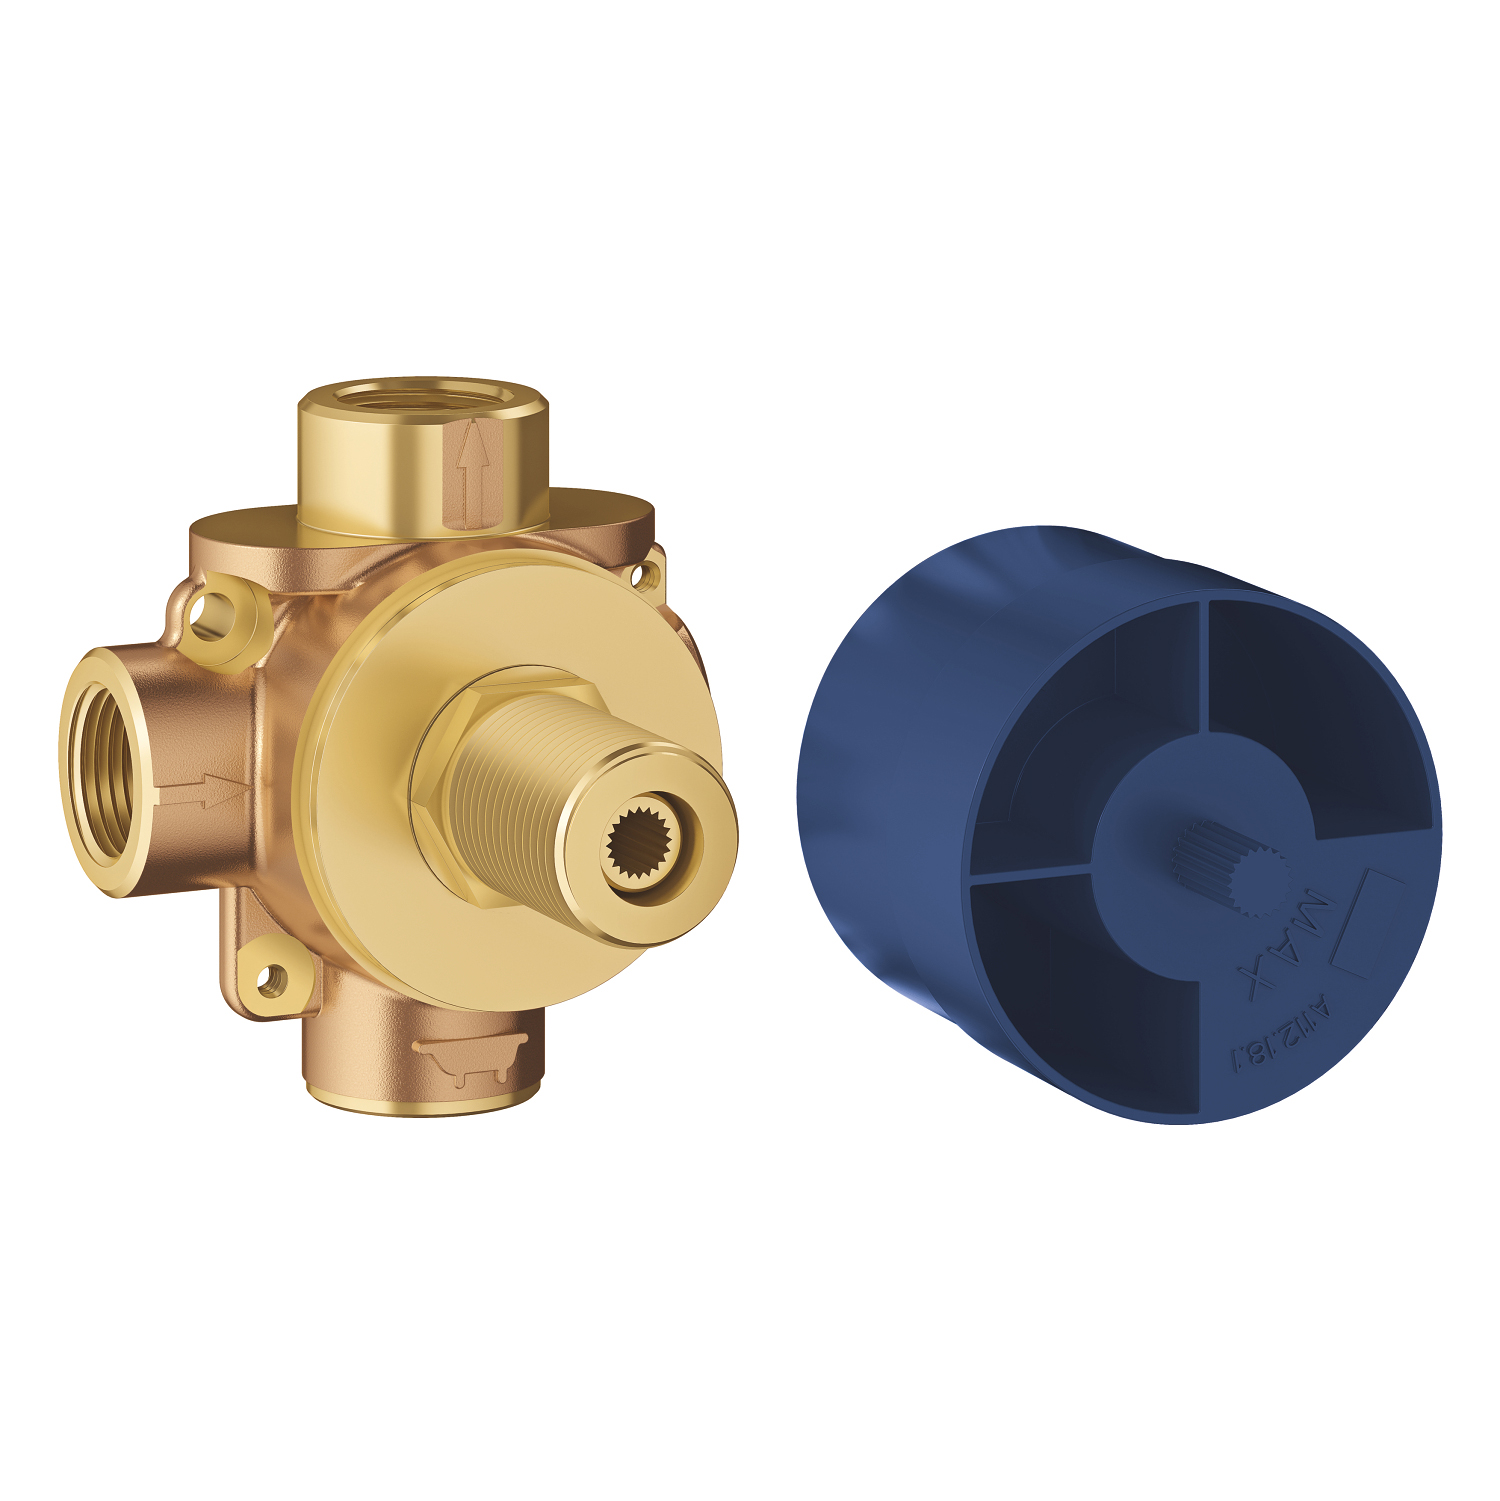 2-Way Diverter Rough-In Valve Shared Functions 1/2" NPT 1 Inlet/2 Outlets